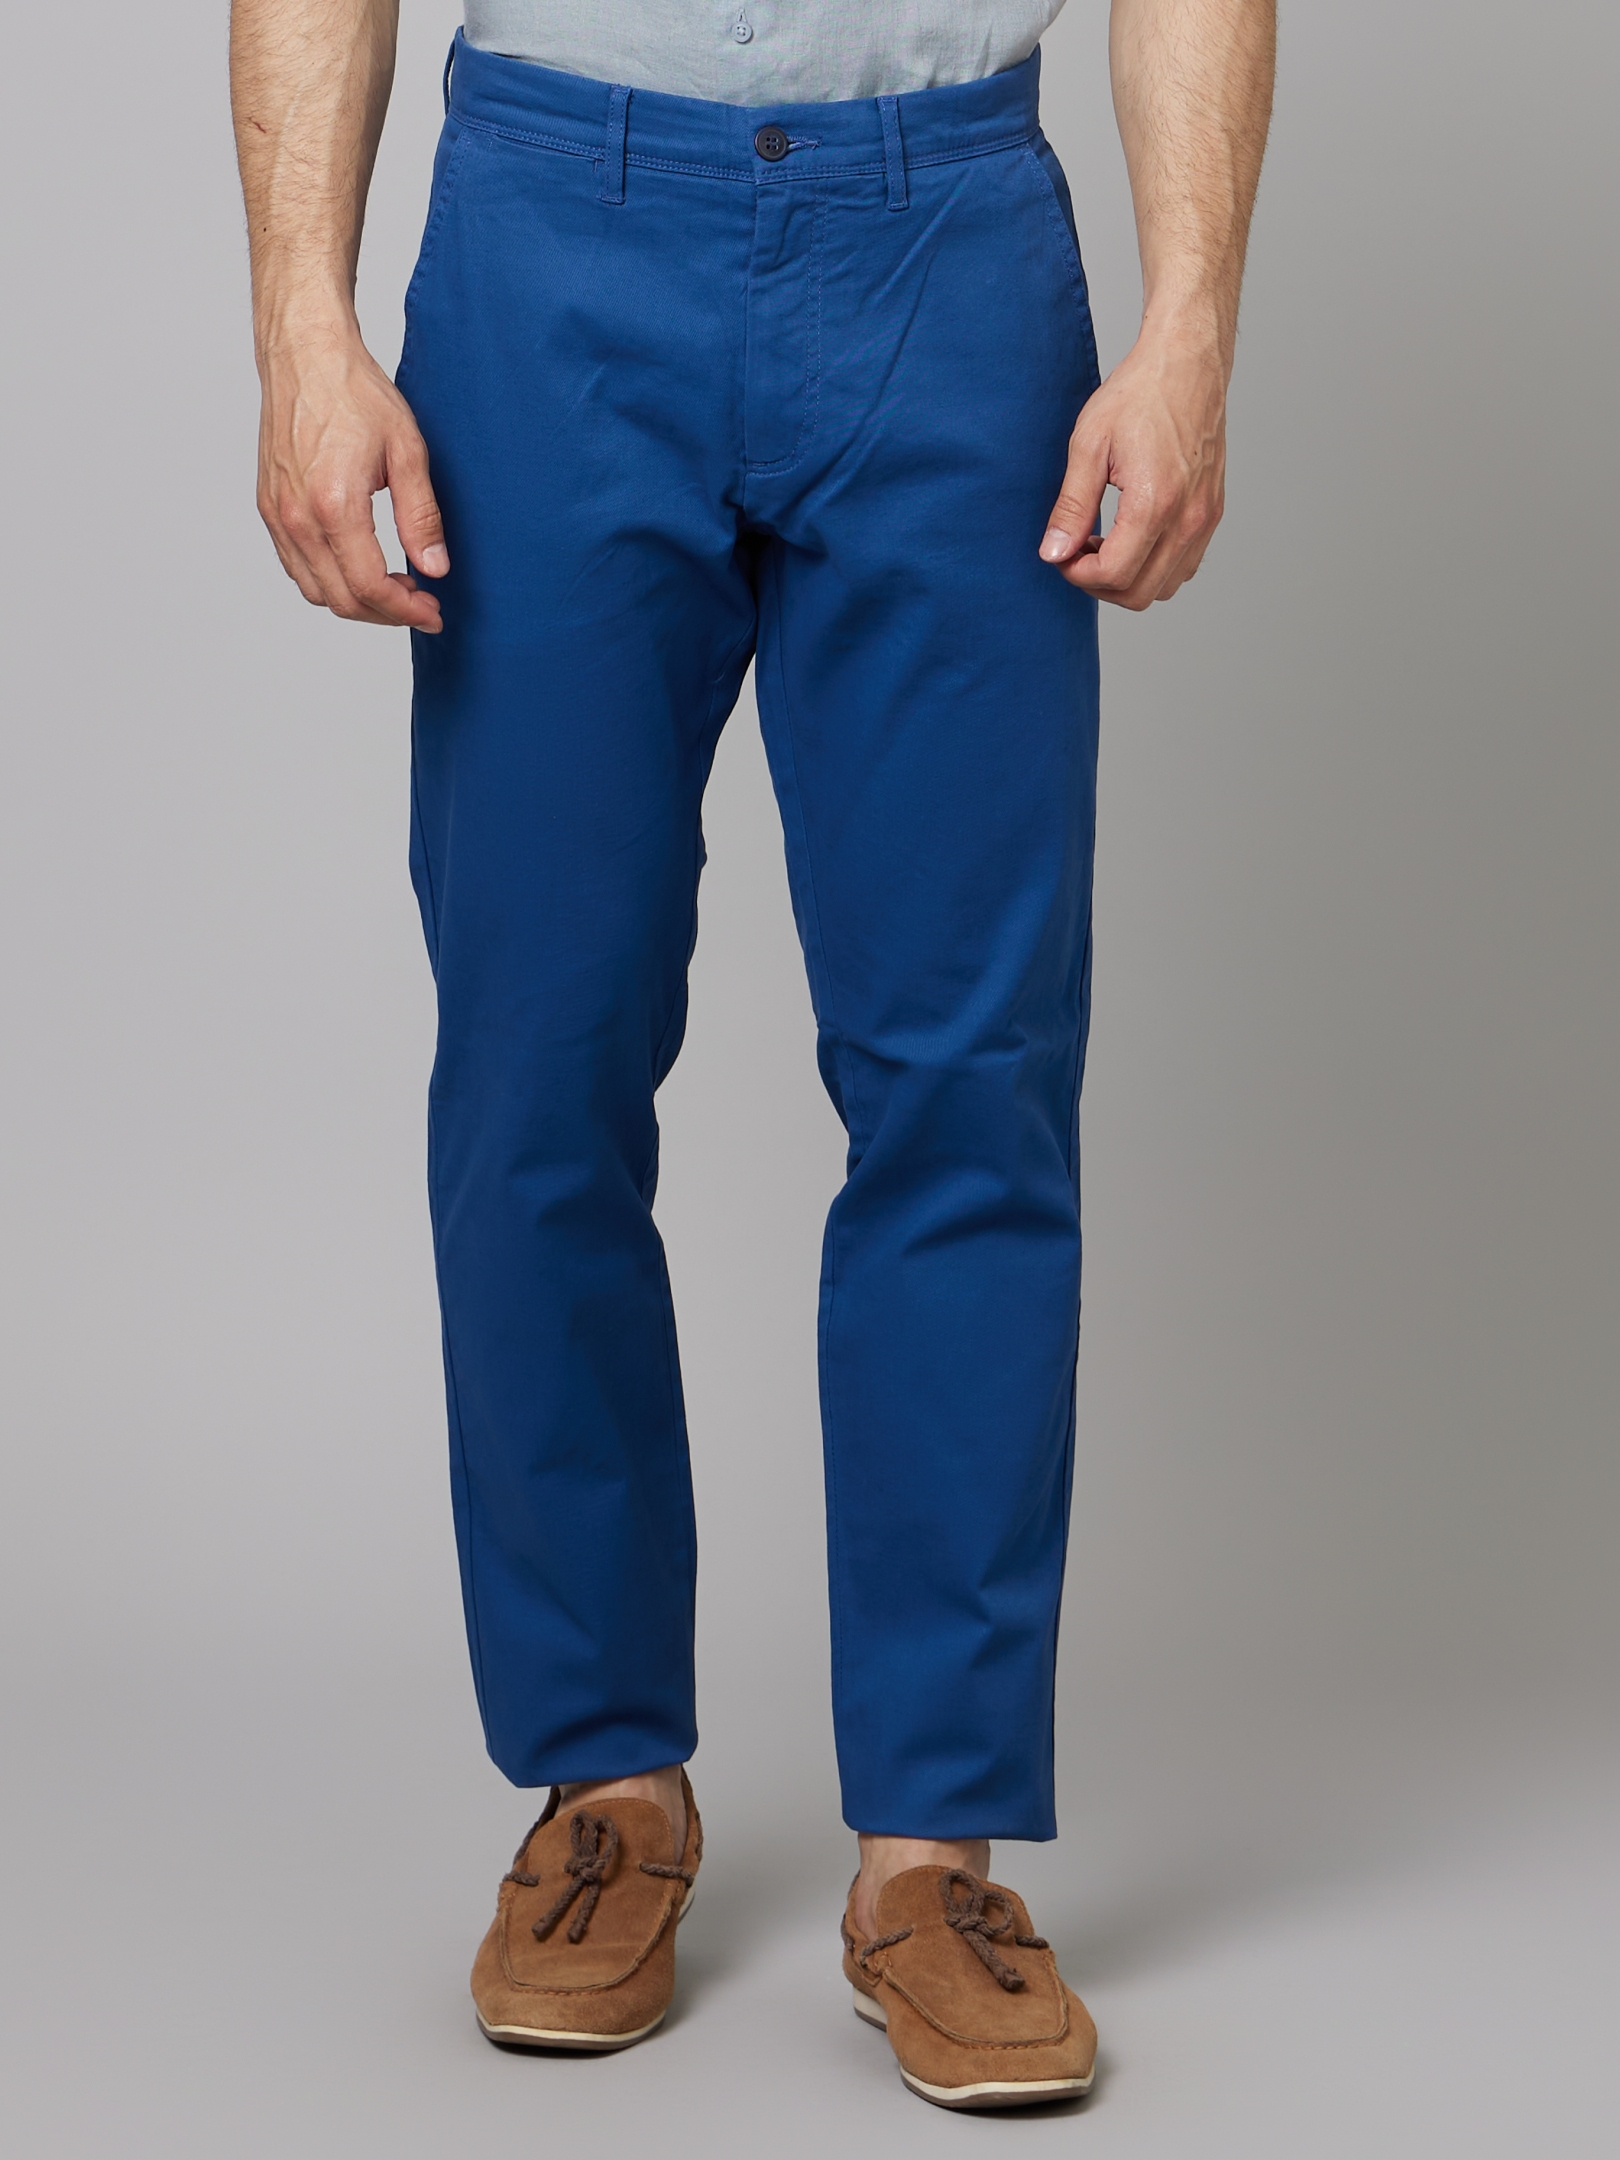 Men's Blue Cotton Blend Solid Chinos